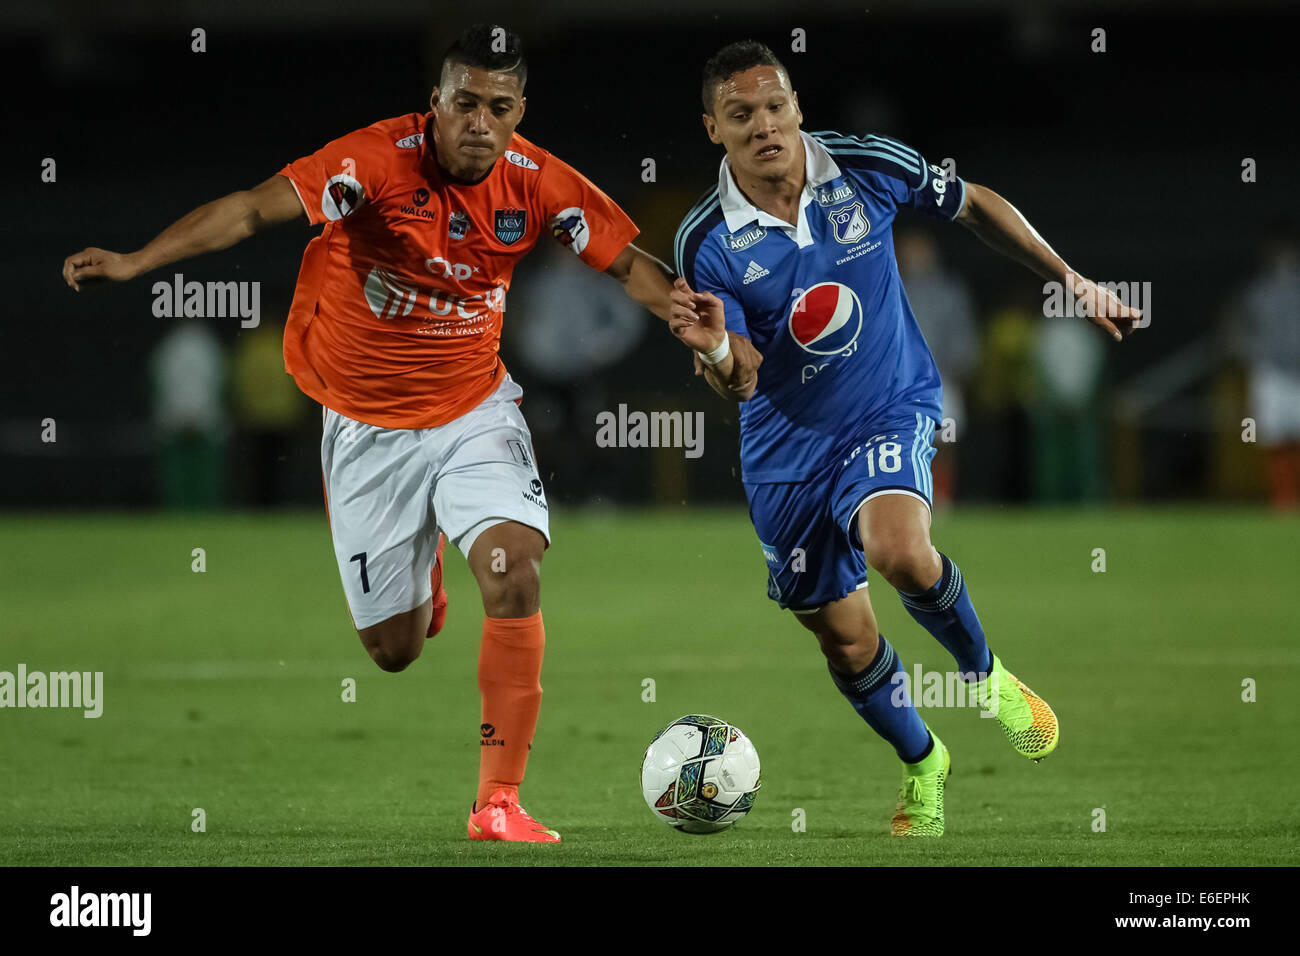 Bogota, Colombia. 21st Aug, 2014. Javier Reina (R) of Millonarios of Colombia vies for the ball with Daniel Chavez (L), of Cesar Vallejo of Peru, during their match of the South American Cup, in Bogota, capital of Colombia, on Aug. 21, 2014. Credit:  Jhon Paz/Xinhua/Alamy Live News Stock Photo